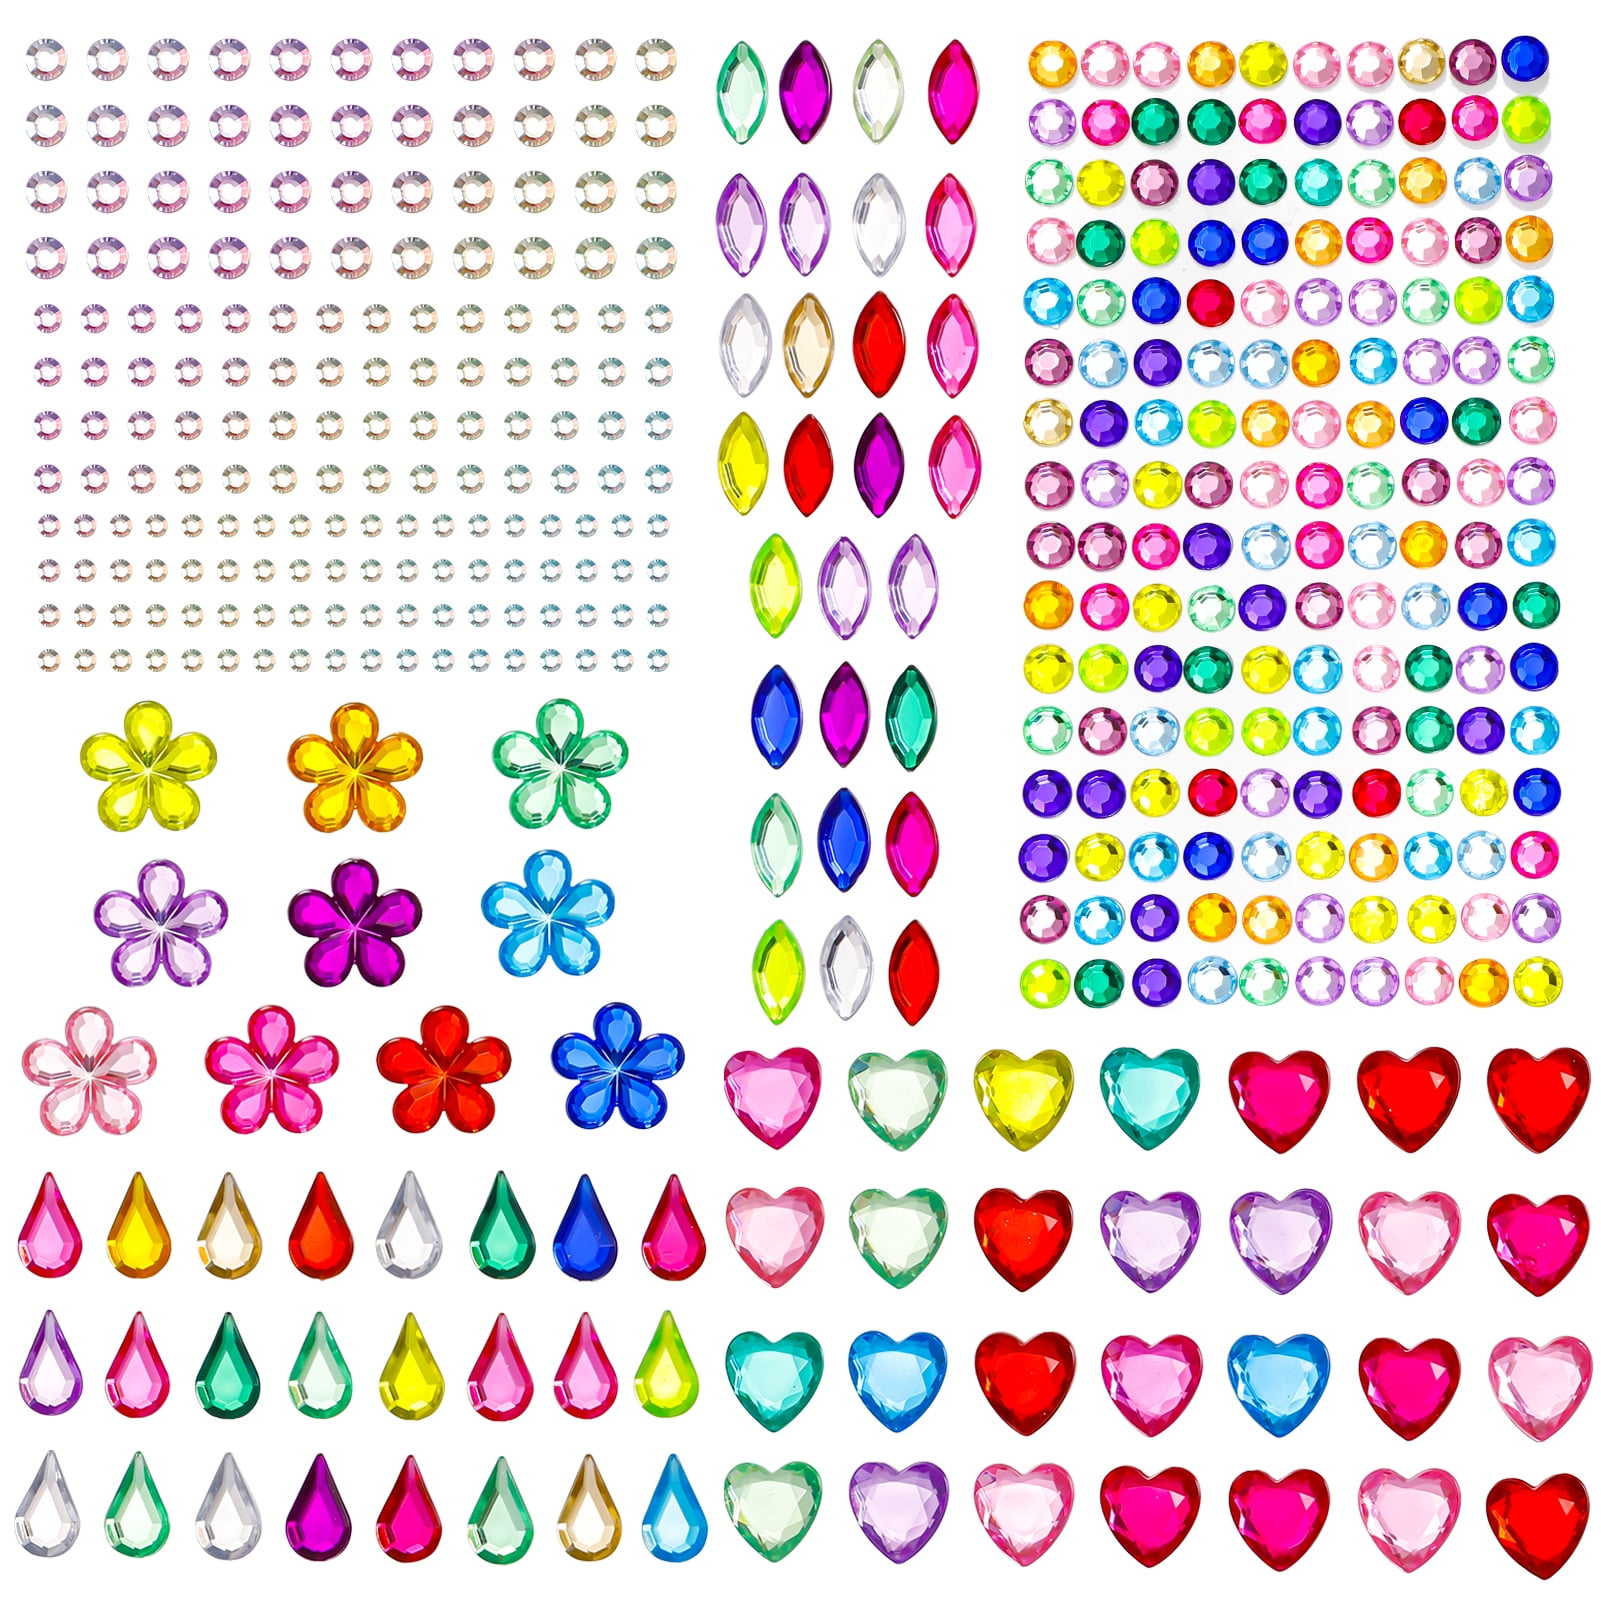 Locacrystal Bling Rhinestone Sticker DIY Home Decor Stickers Self-Adhesive Crystal Sheet Stickers for Cars & Crafts Decoration(Silver 9.4 x 15.8) Sil